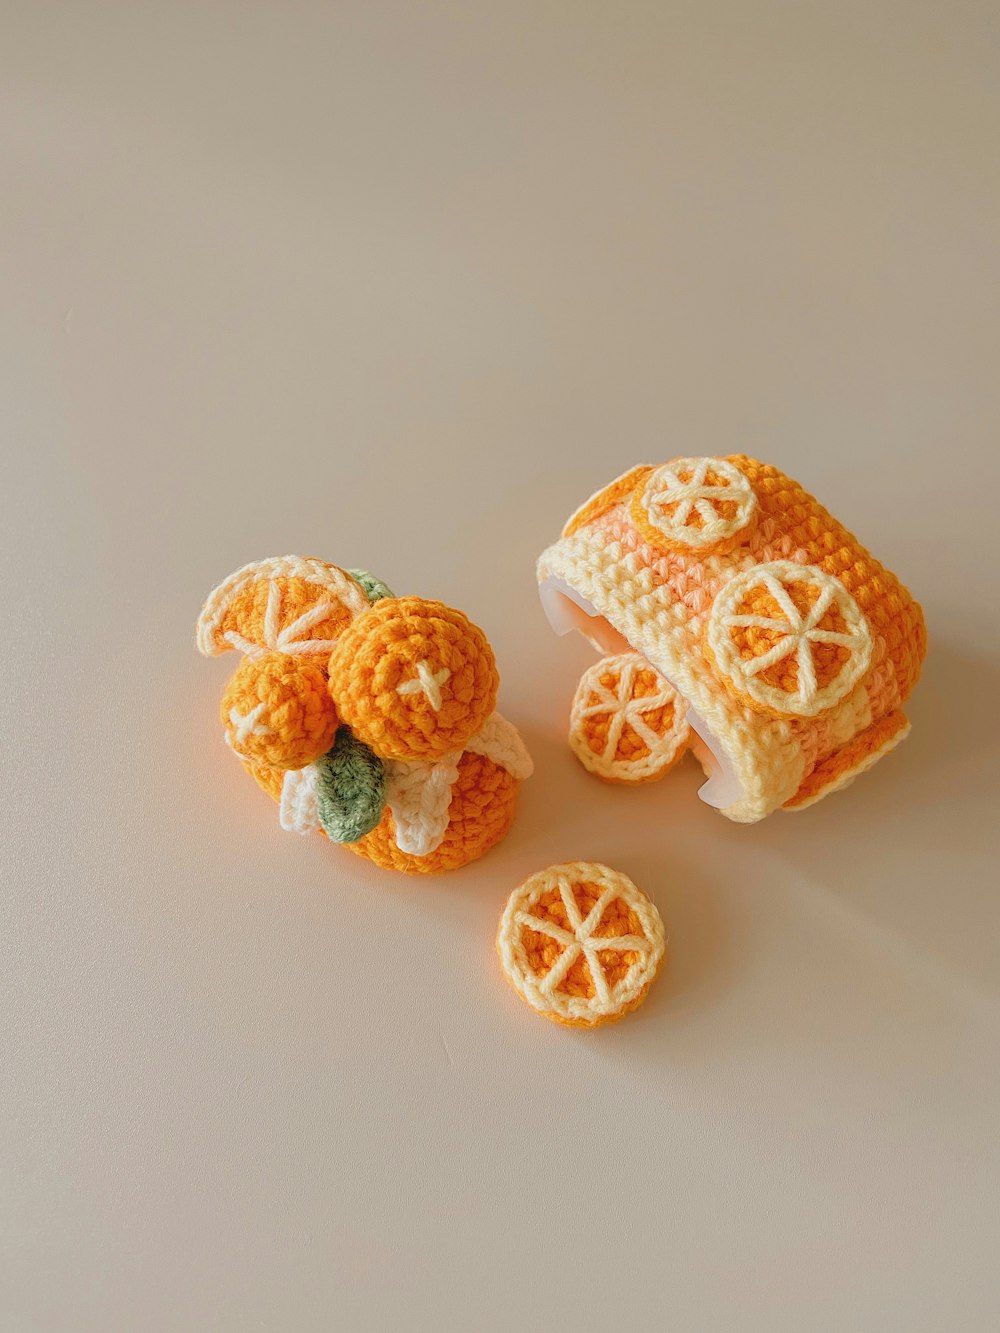 a small crocheted orange with a piece of fruit on top of it